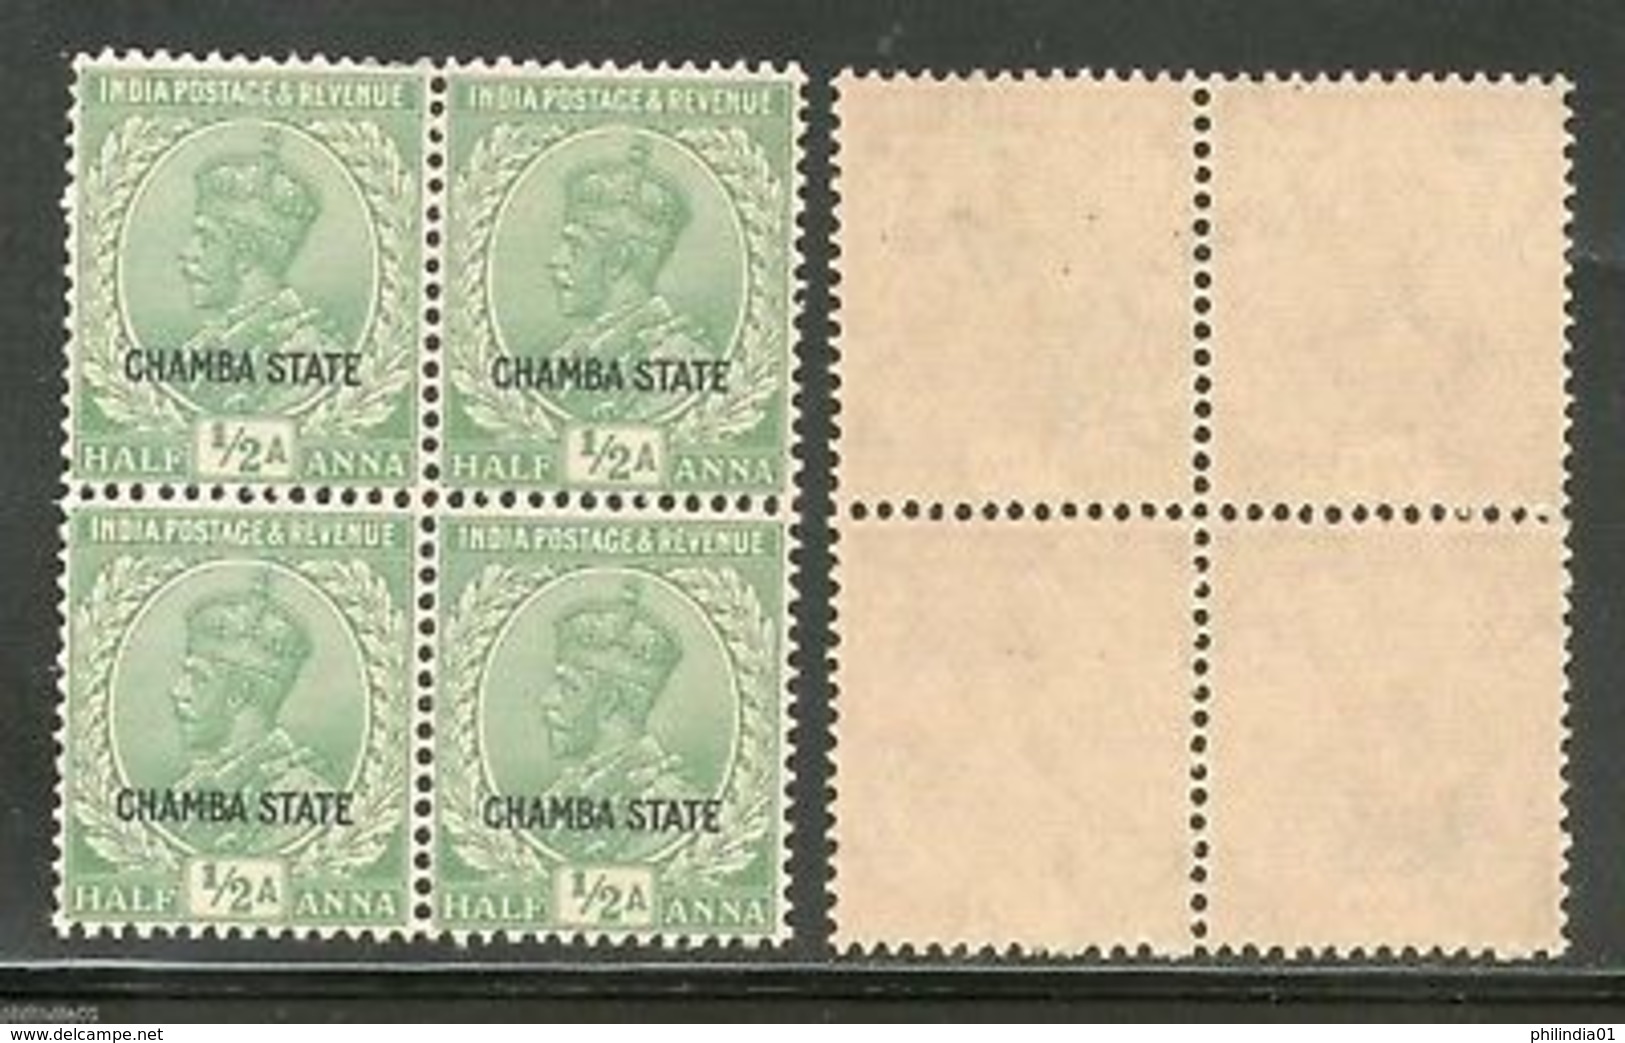 India CHAMBA State KG V �An Postage Stamp SG 63 / Sc 60 In BLK/4 MNH - Chamba